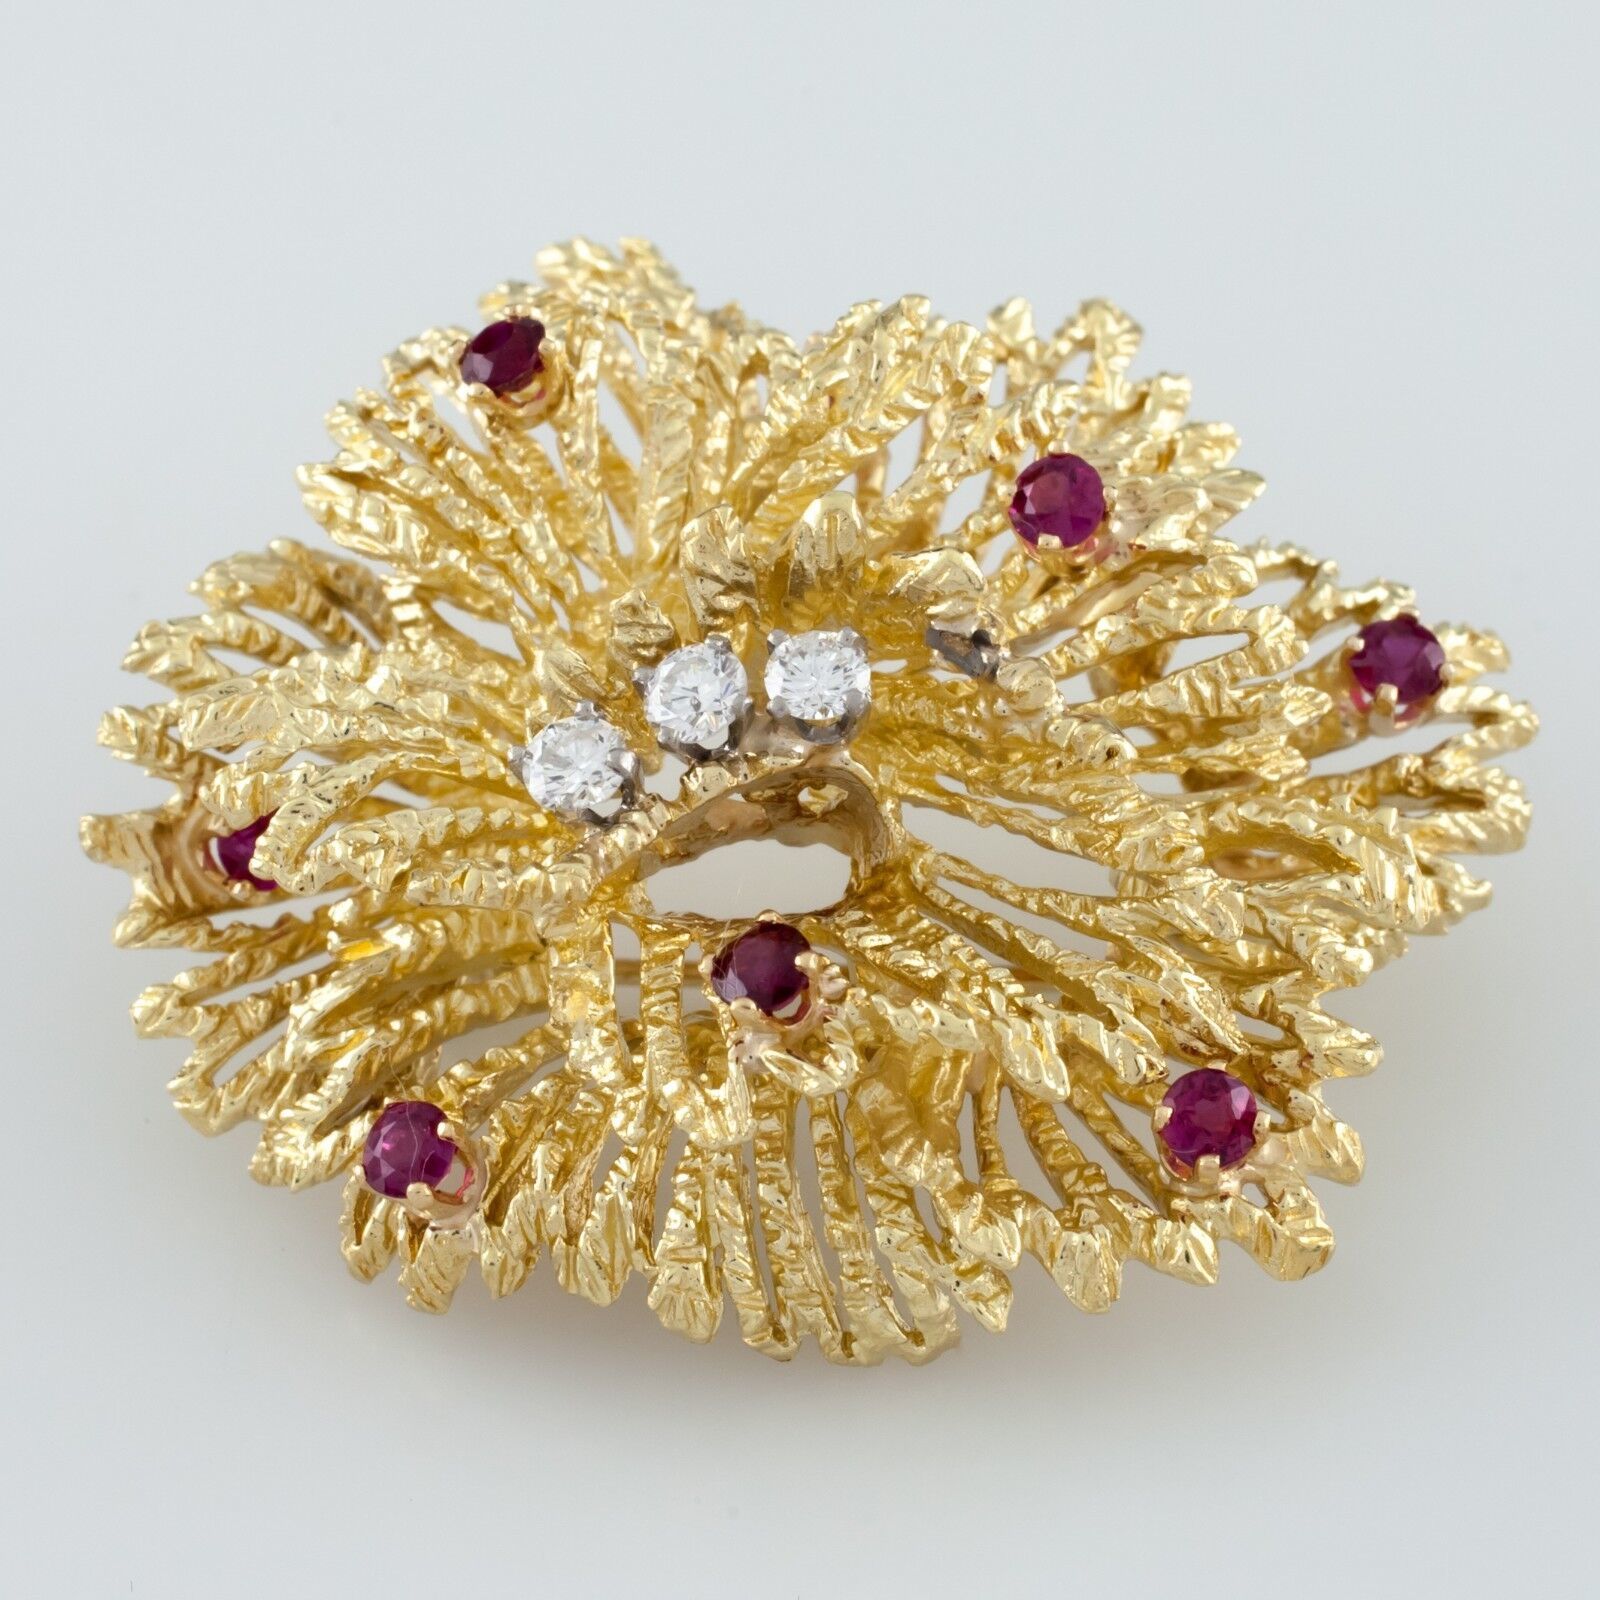 Primary image for Authenticity Guarantee 
Tiffany & Co. Vintage Ruby and Diamond 18k Yellow Gol...